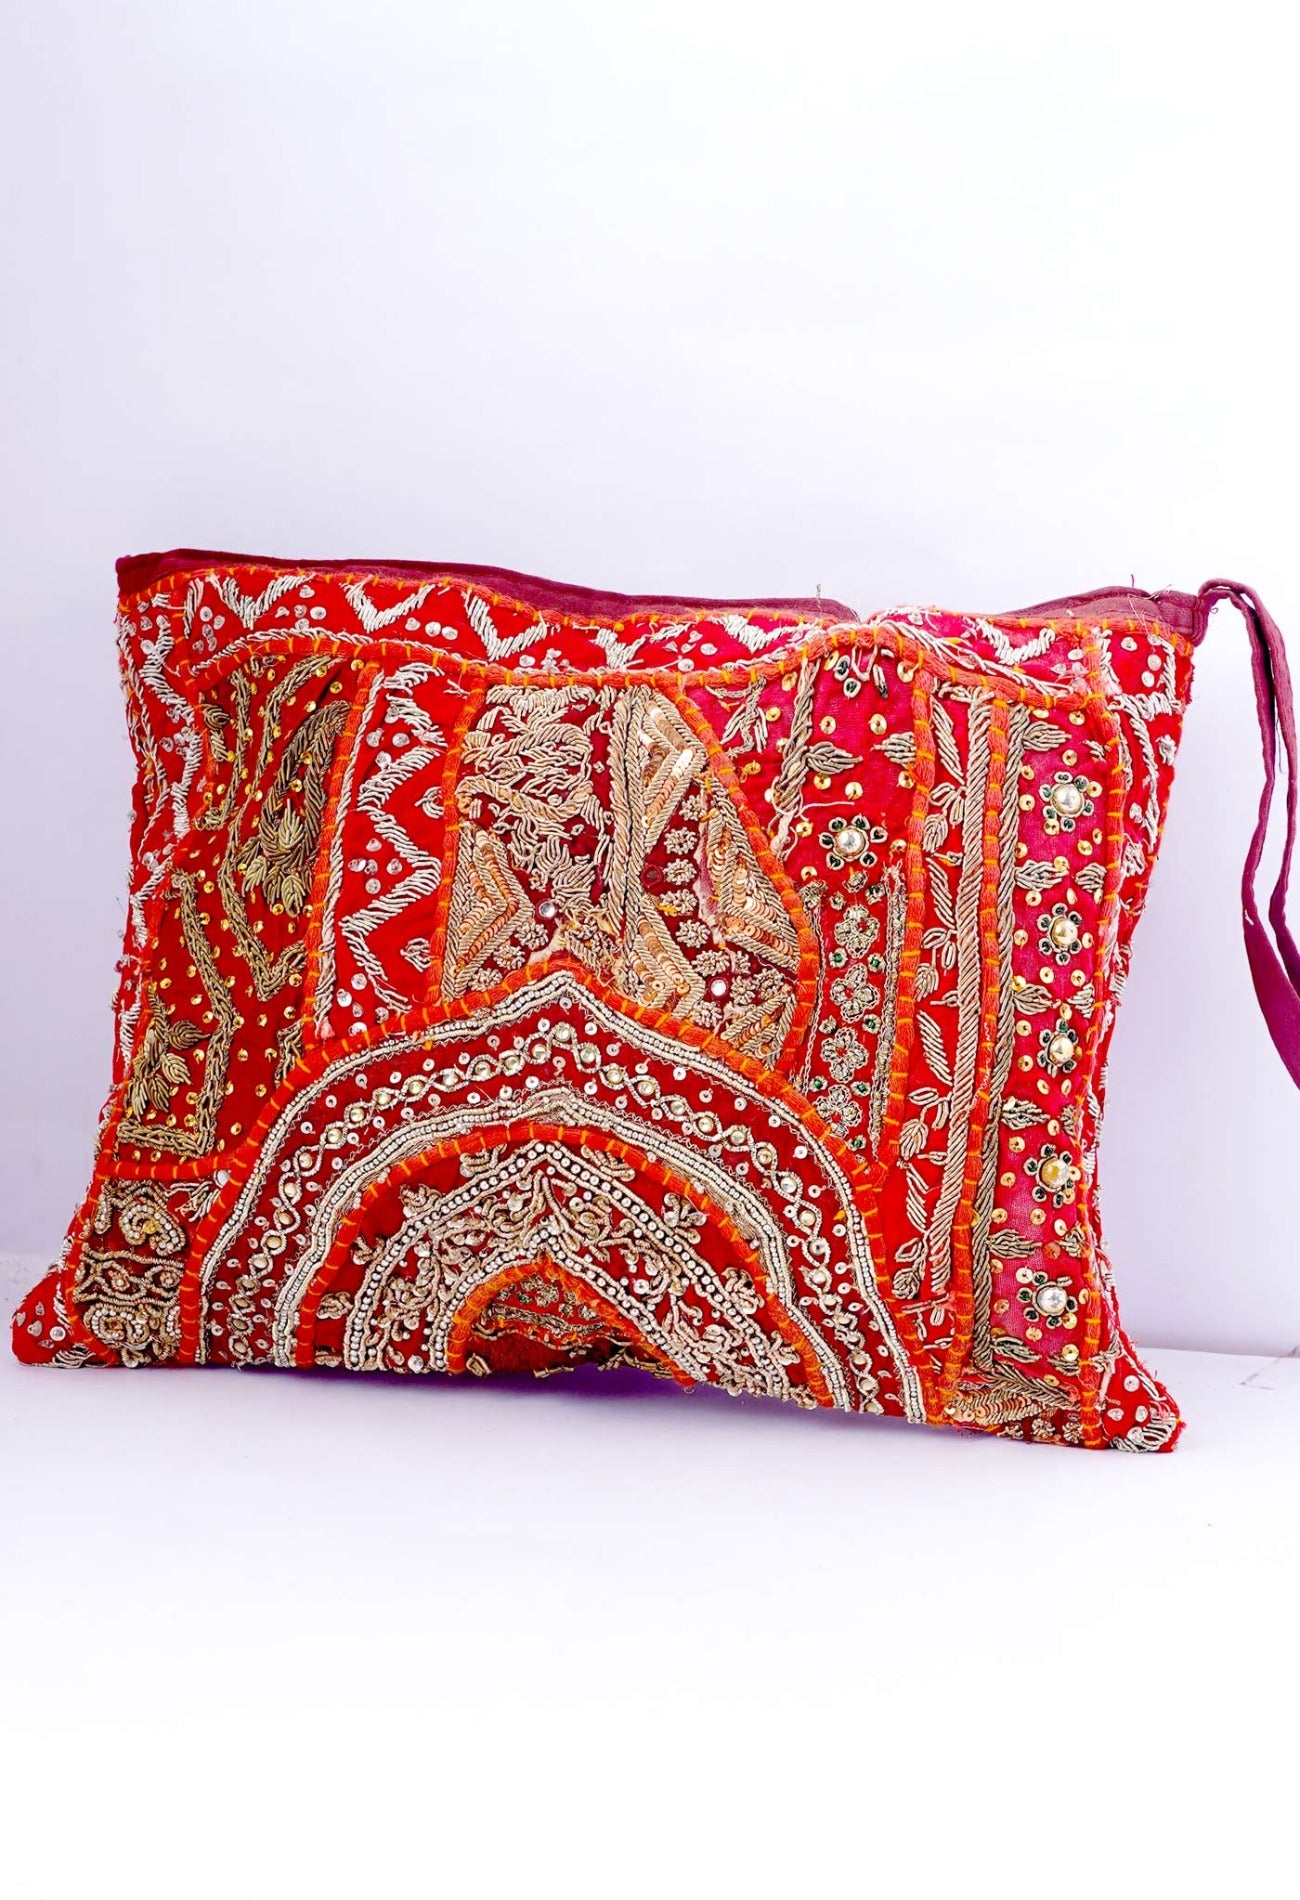 Online Shopping for Red Indian Handicraft Embroidered Hand Bag with Weaving from Rajasthan at Unnatisilks.com India_x000D_
Online Shopping for Red Indian Handicraft Embroidered Hand Bag with Weaving from Rajasthan at Unnatisilks.com India_x000D_
Online Shopping for Red Indian Handicraft Embroidered Hand Bag with Weaving from Rajasthan at Unnatisilks.com India_x000D_
